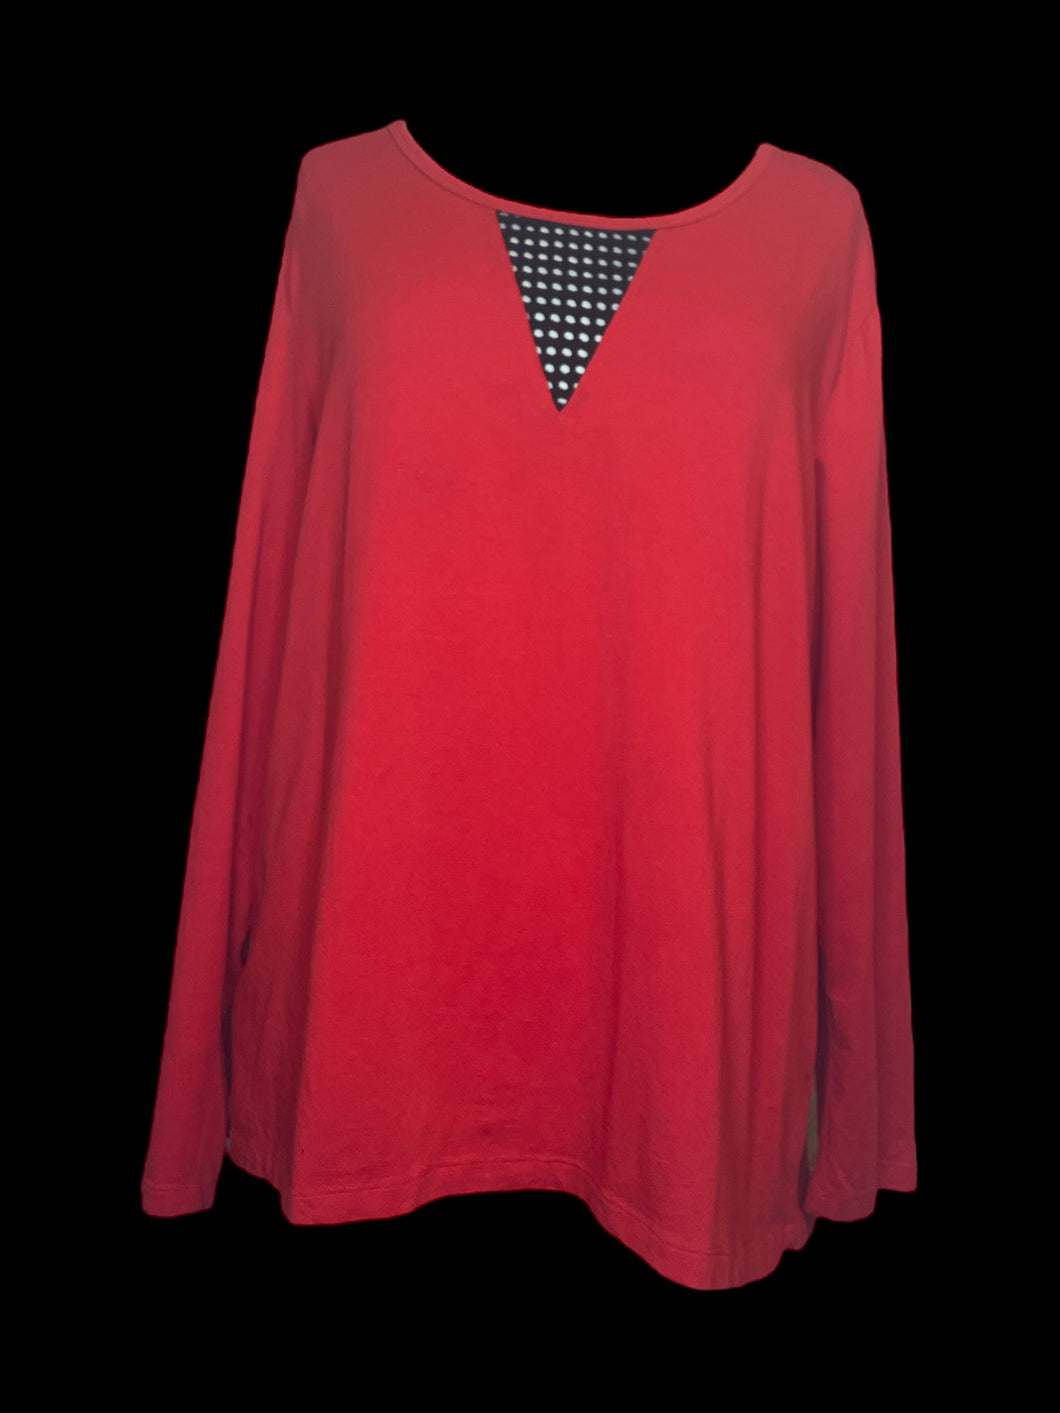 4X Red long sleeve top w/ triangle black mesh front & back